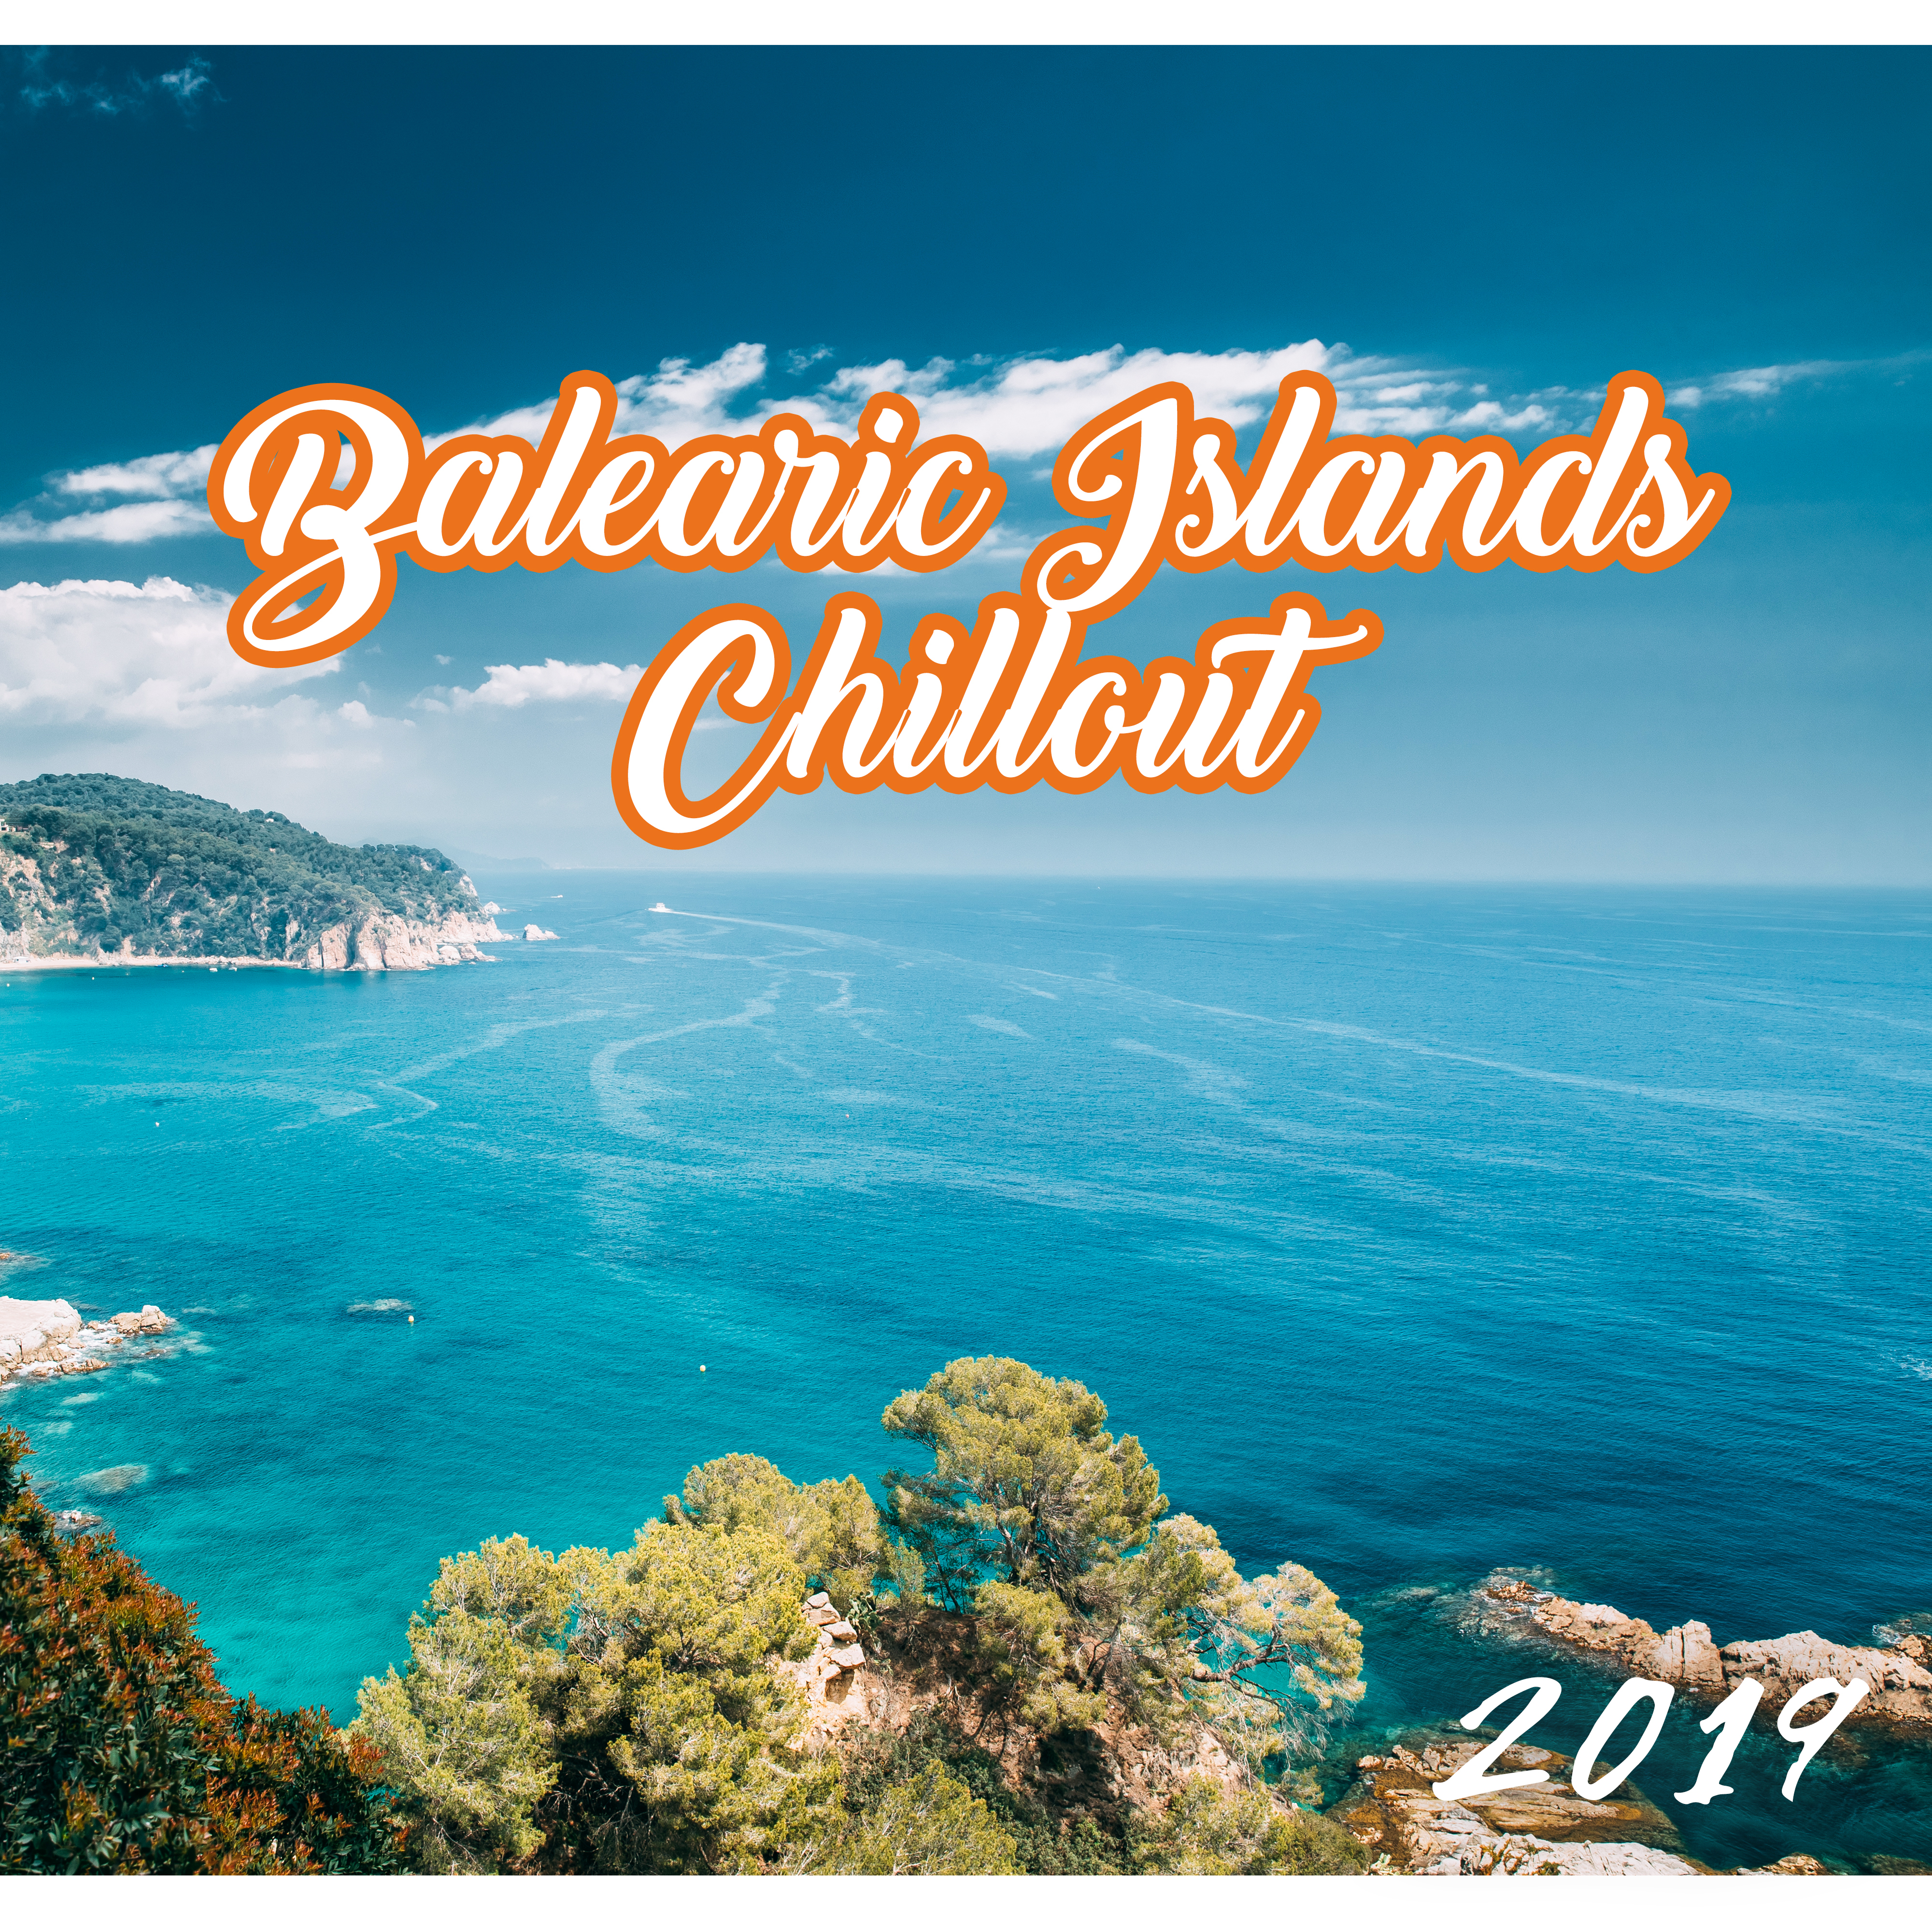 Balearic Islands Chillout 2019